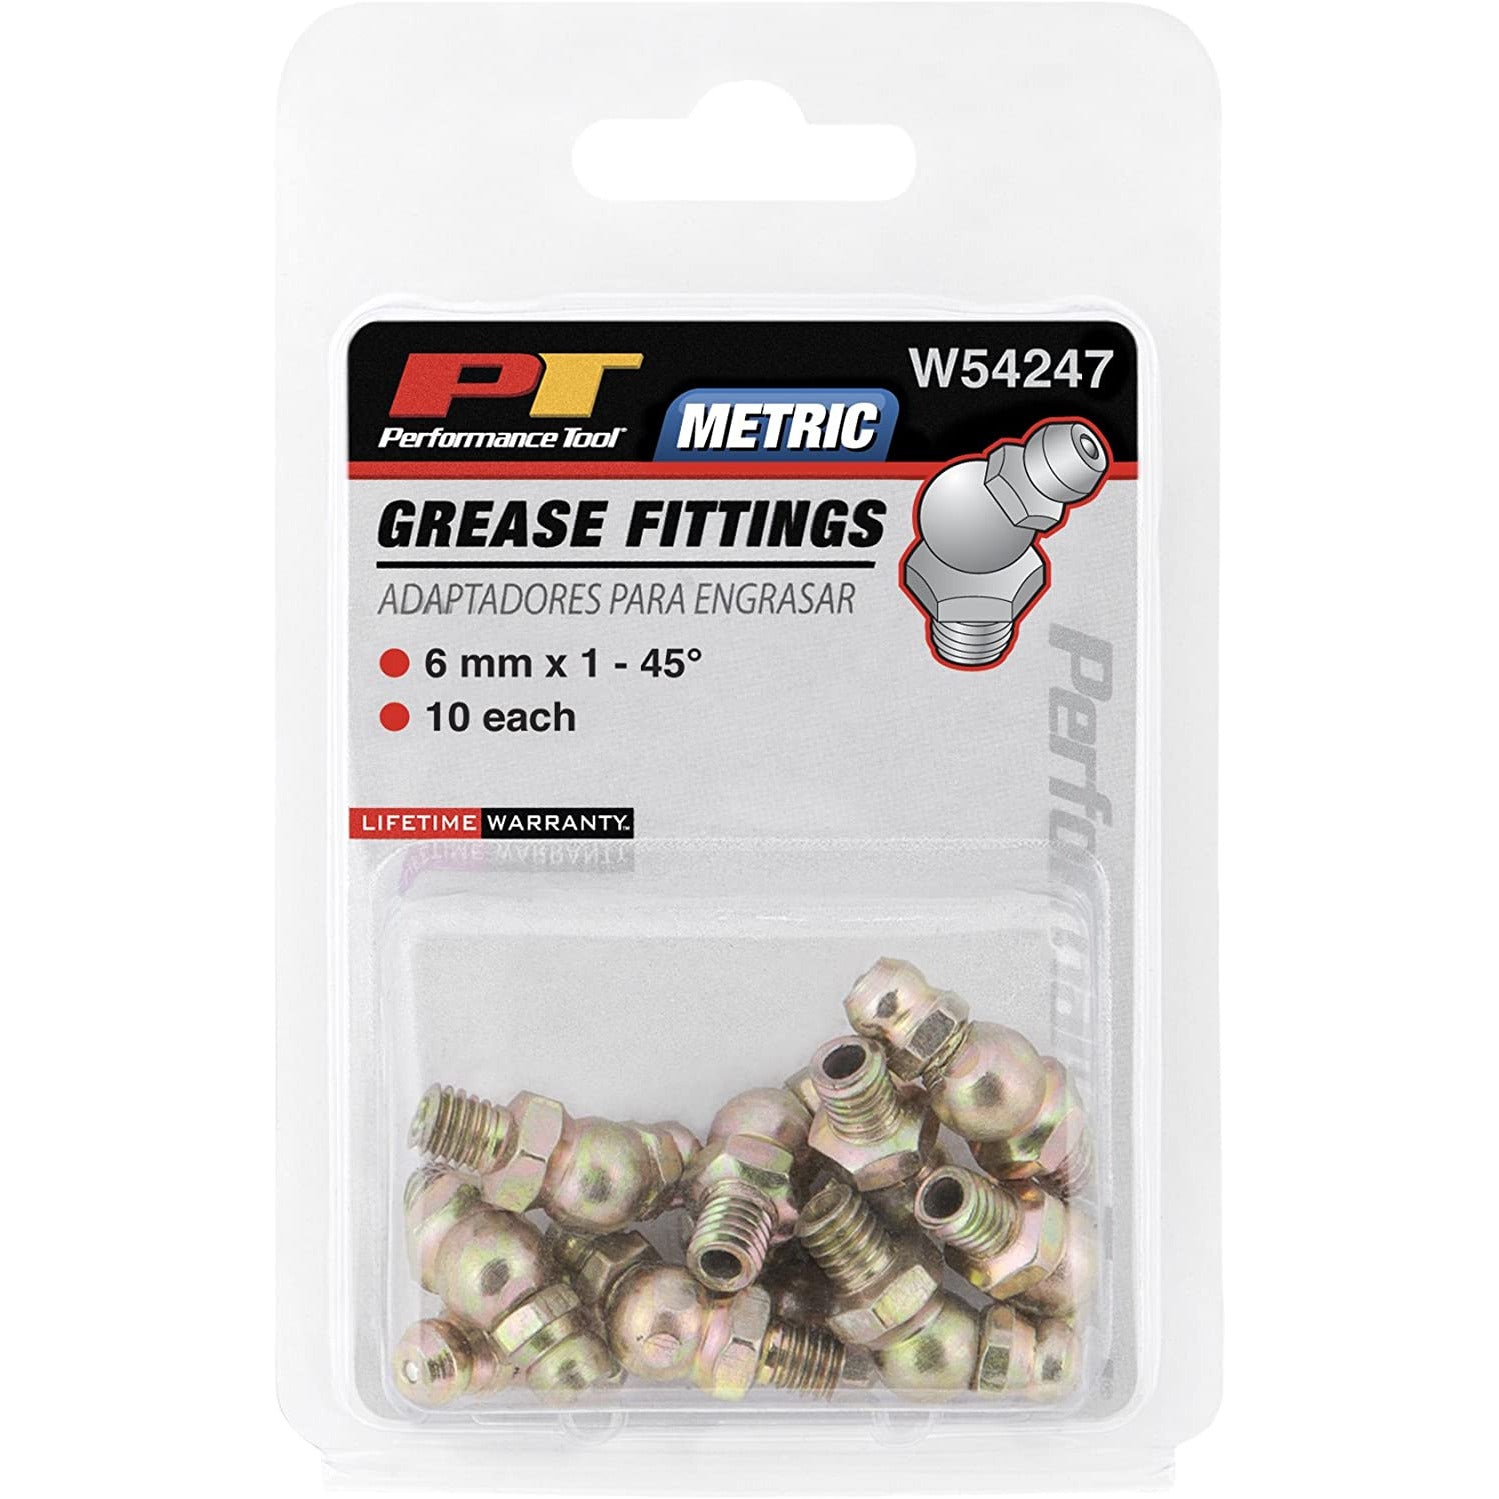 WIL W54247 Performance Tool 45 Degree 6mm Metric Grease Fittings (10 pk)